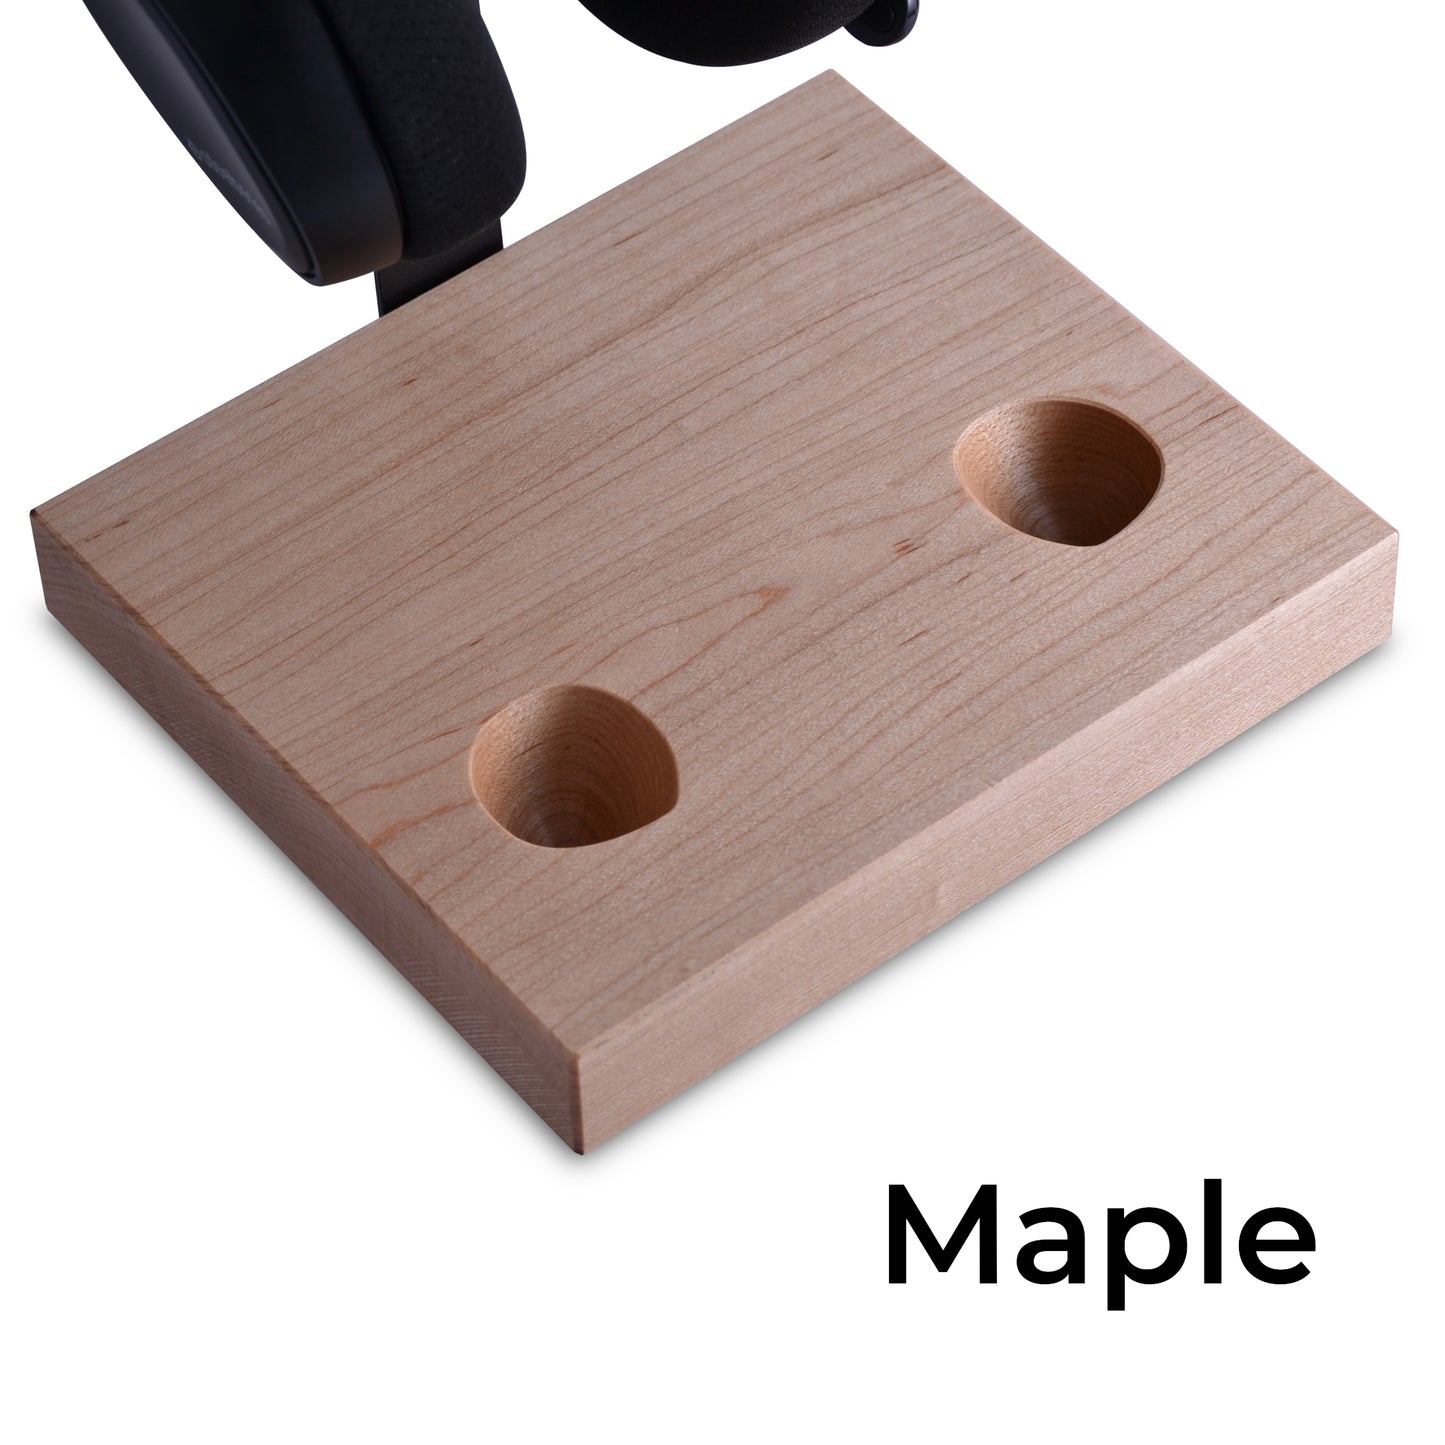 Maple version of headset and controller stand for Xbox one controller